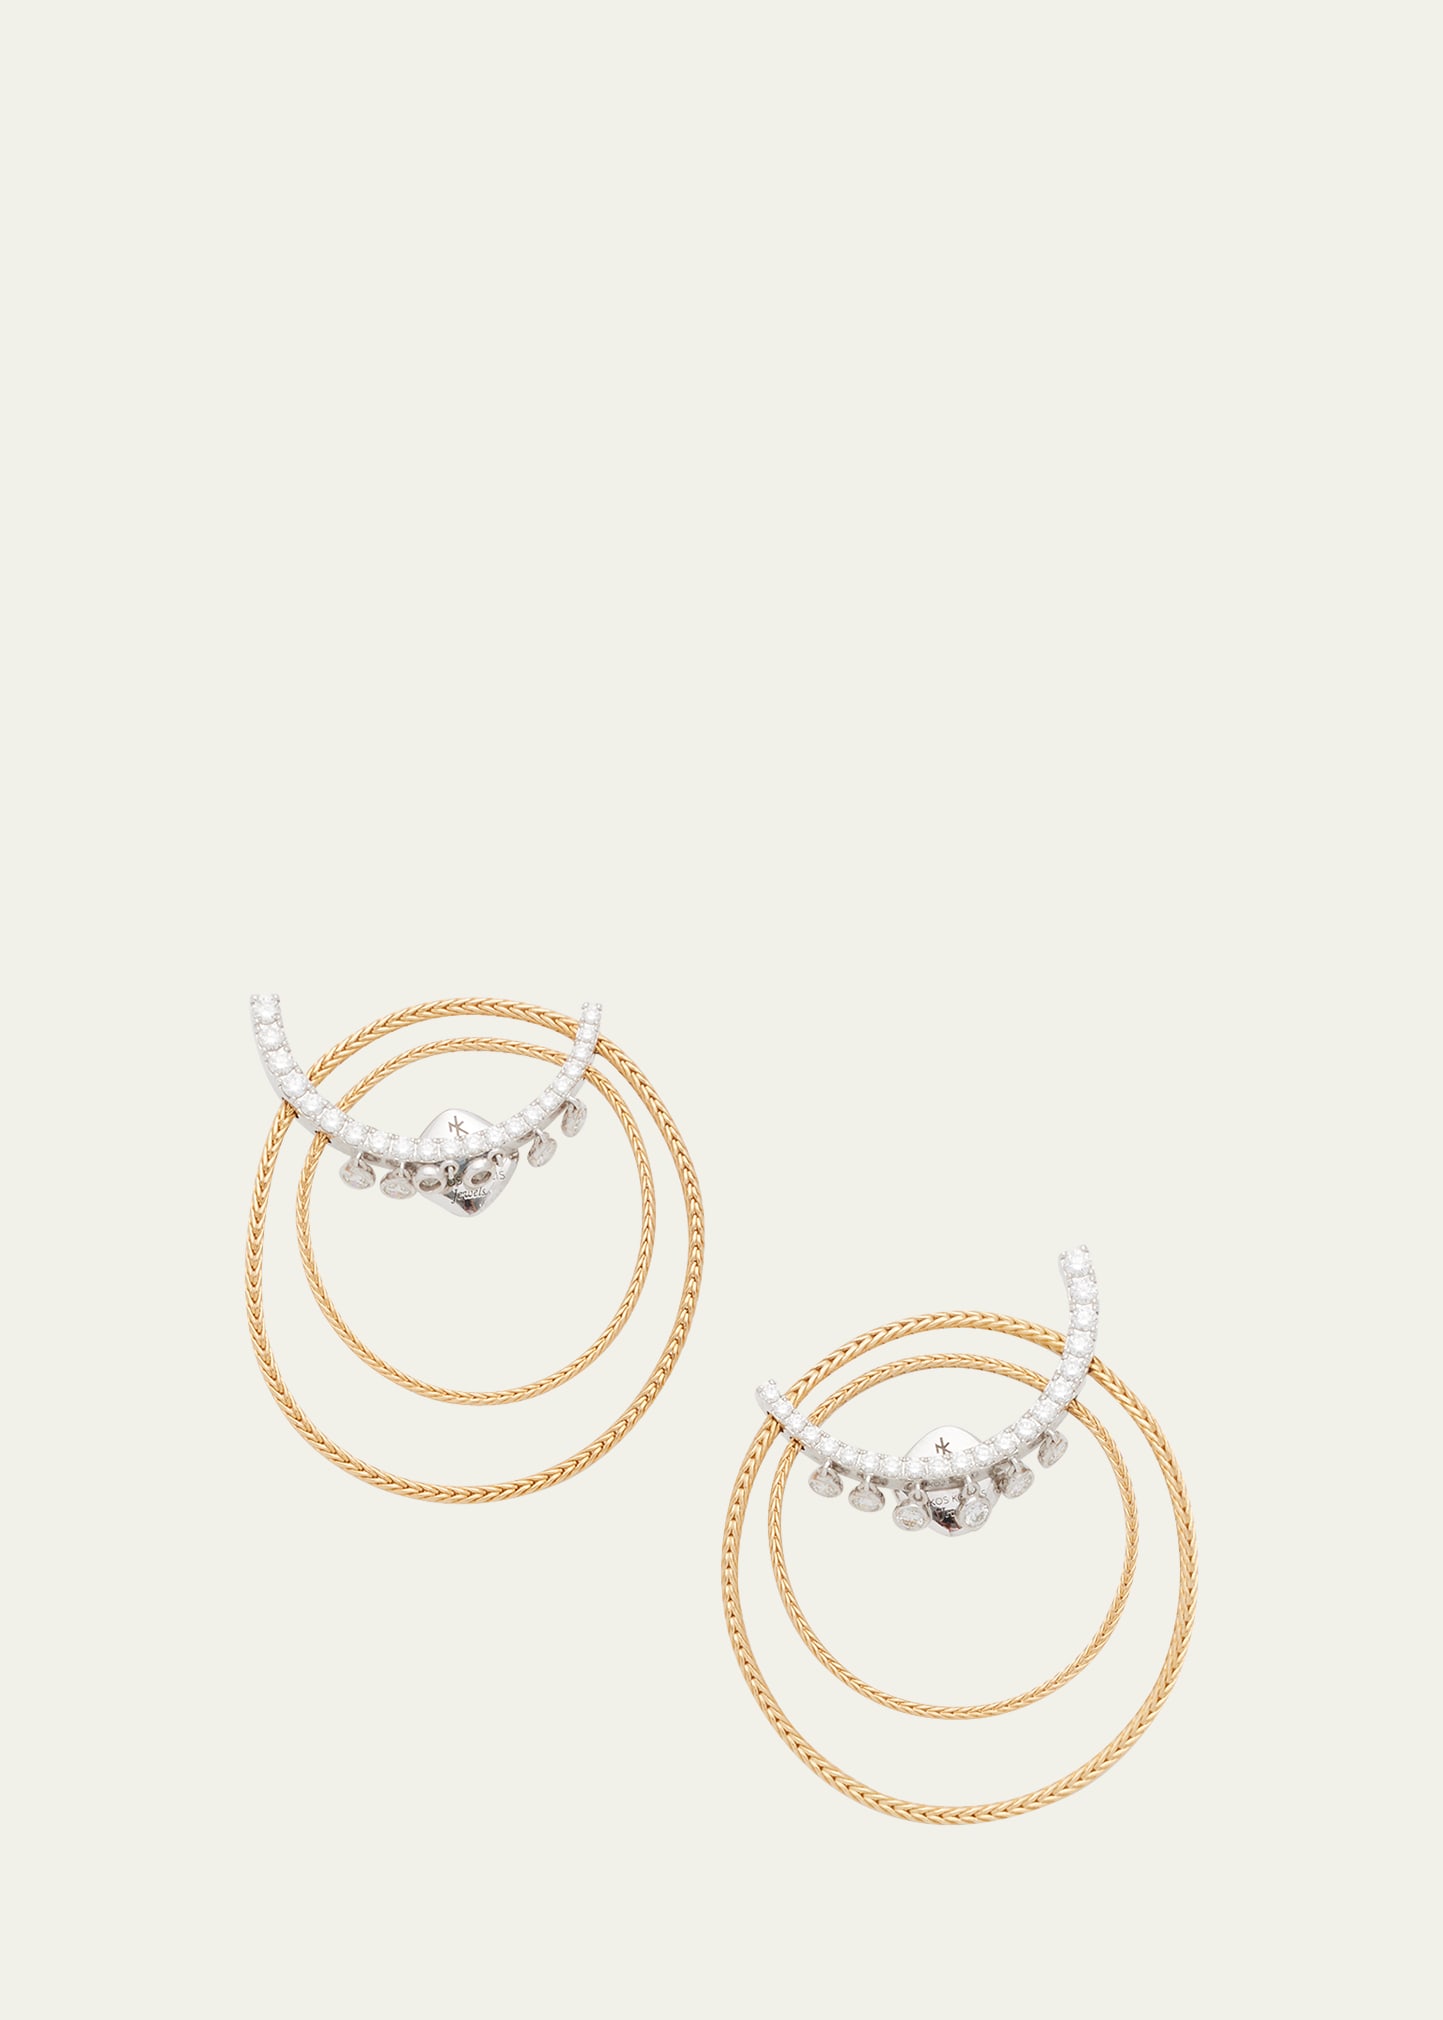 Together Circle Earrings with White Diamonds in Two-Tone 18K Gold